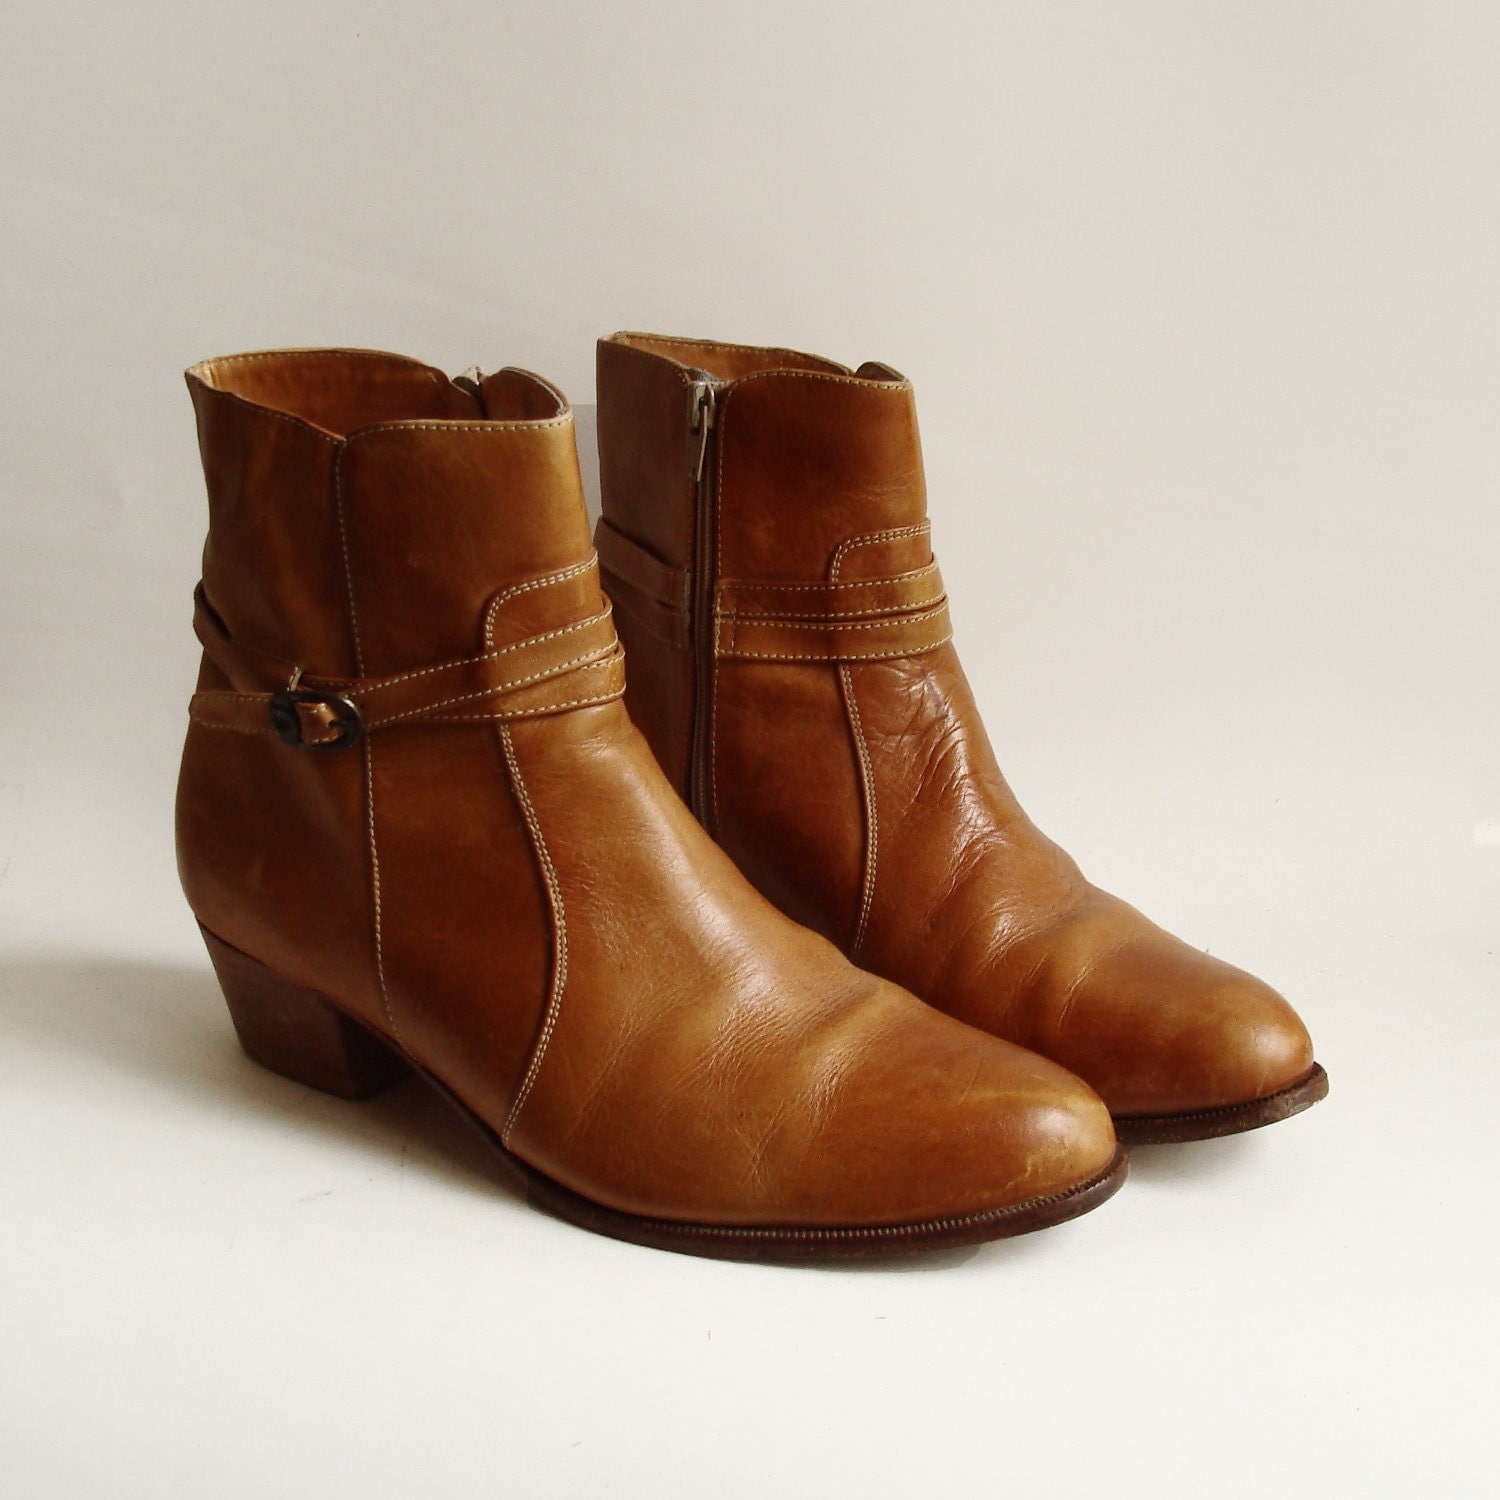 Brow Leather Boots Images - Reverse Search